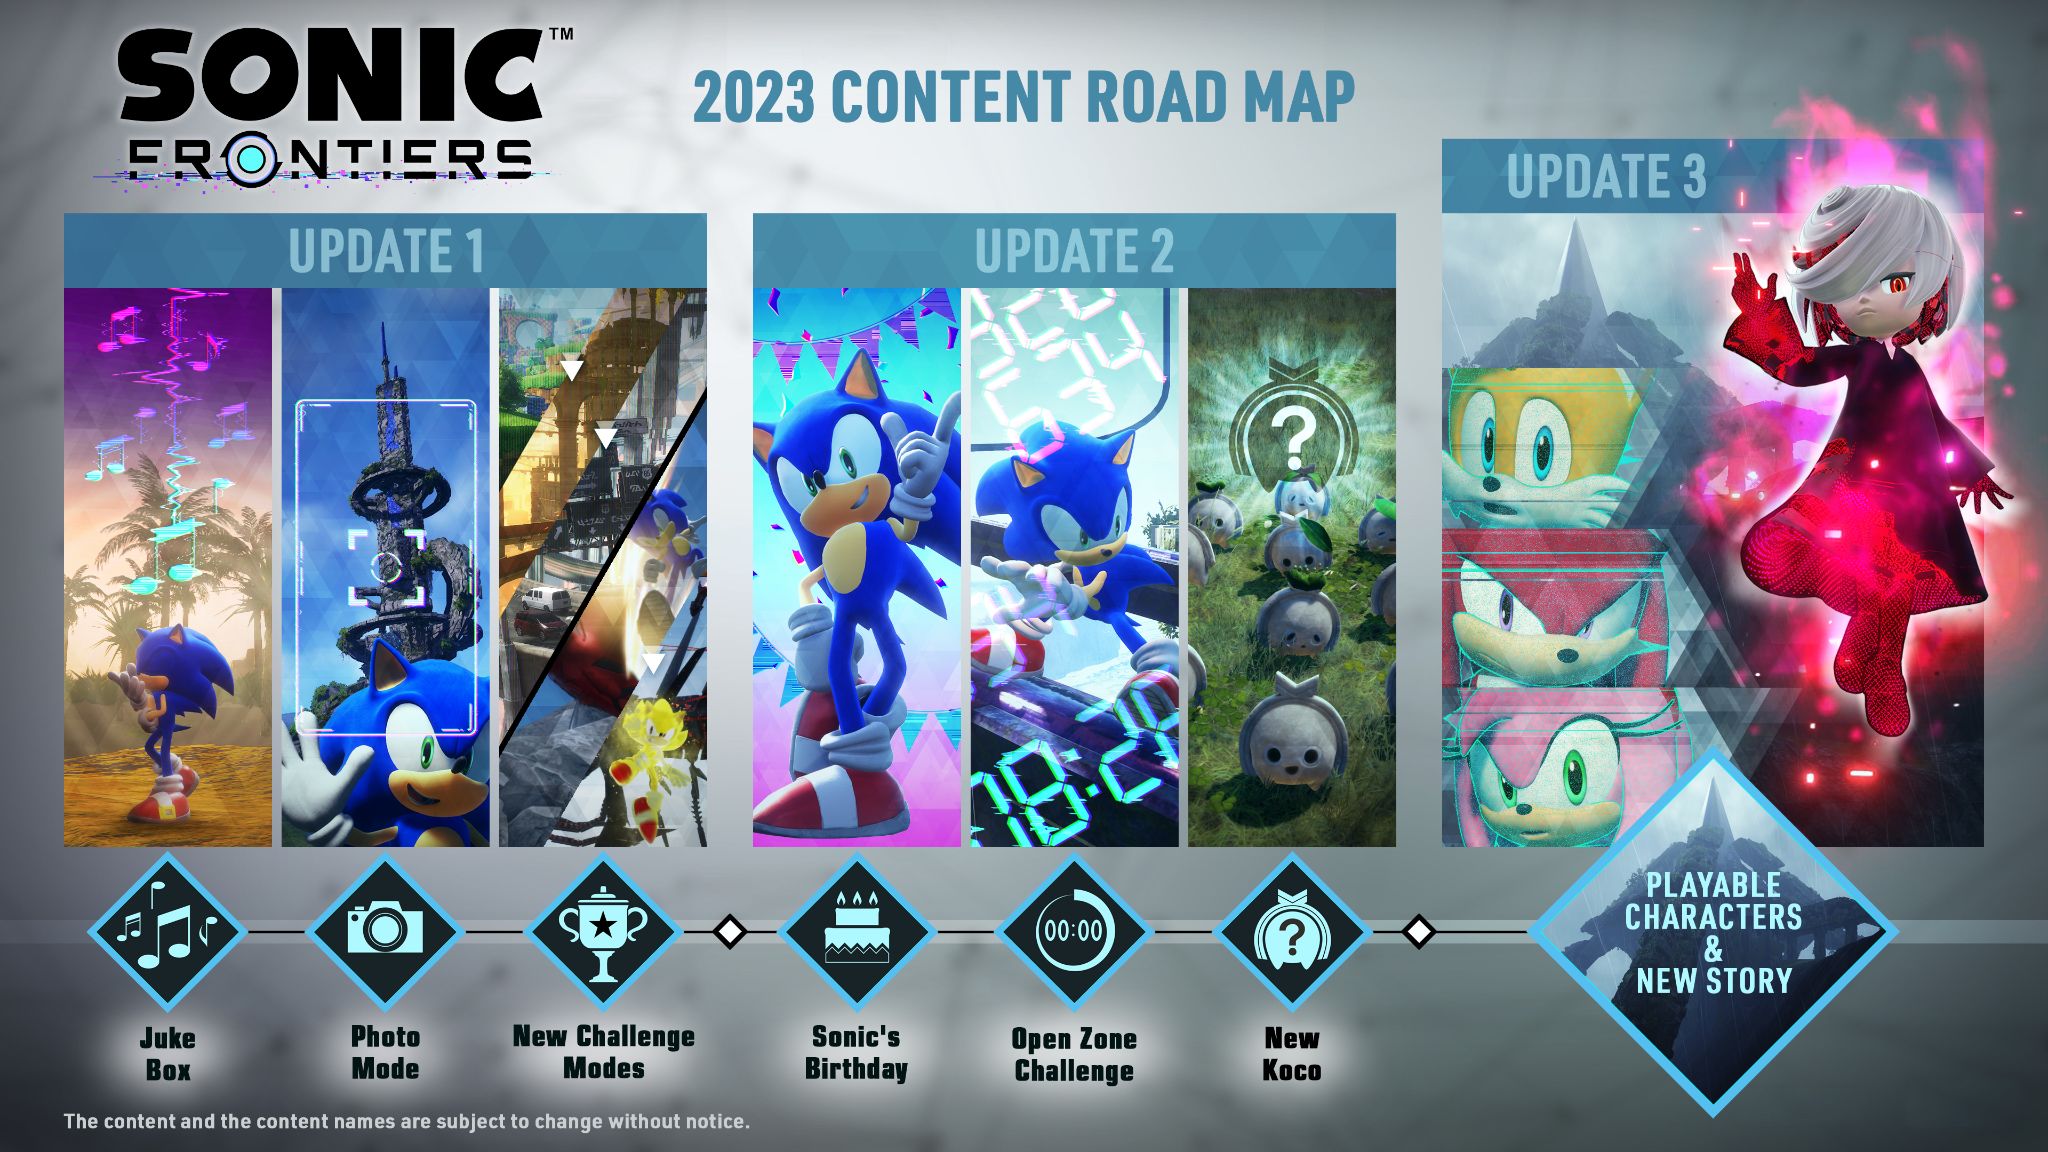 Sonic Frontiers' Free DLC Roadmap Includes New Playable Characters And  Story Content